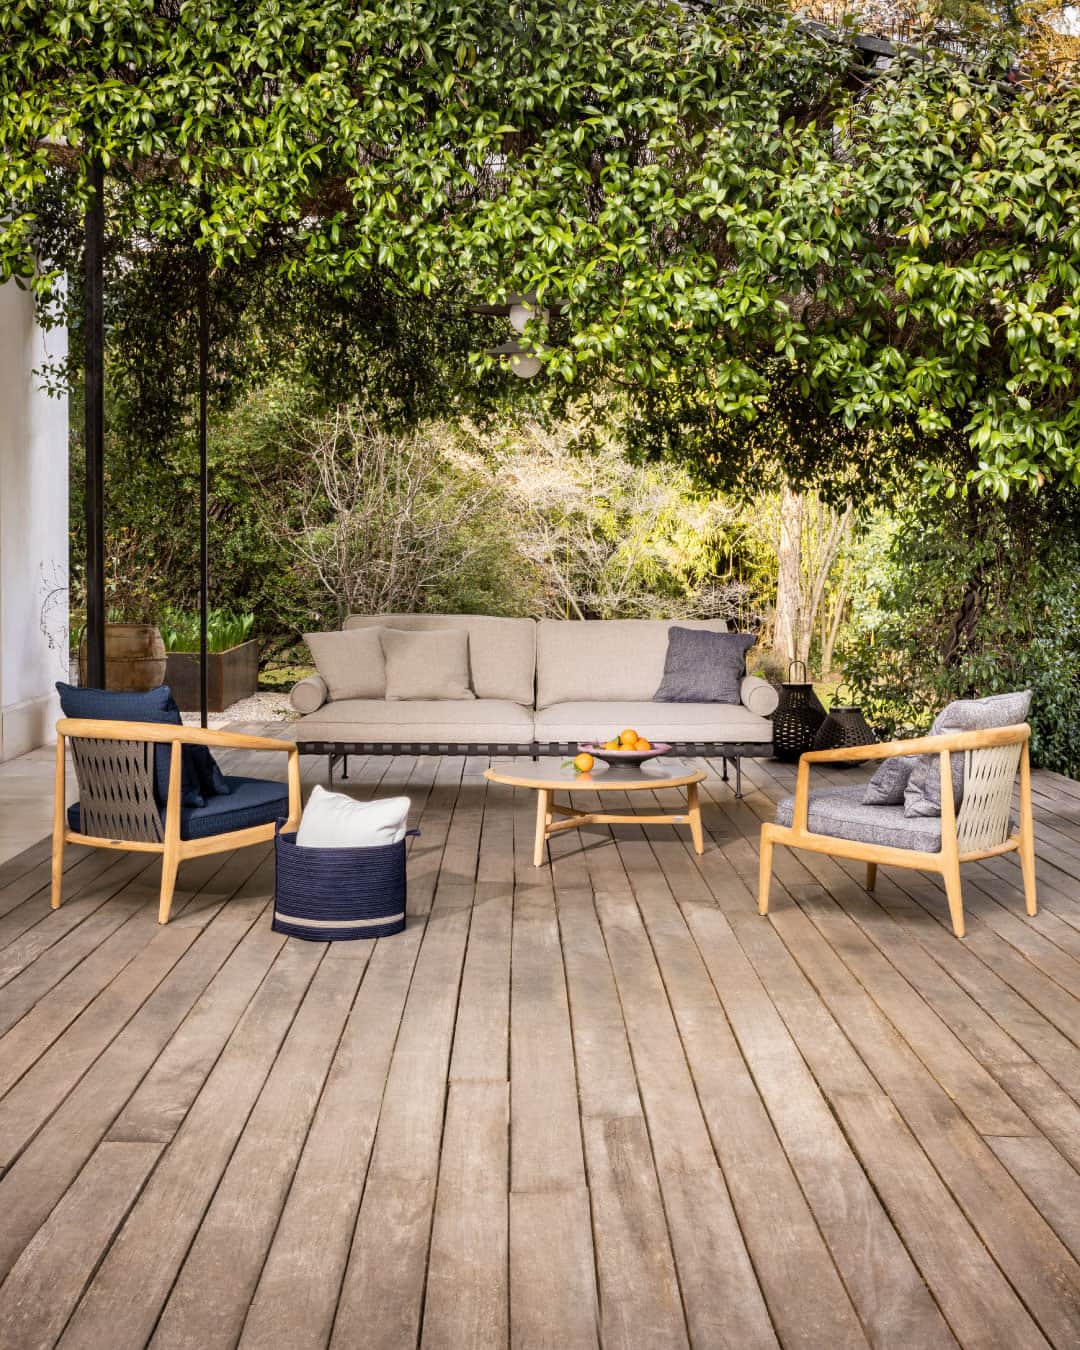 Poltrona Frauのインスタグラム：「Summer is around the corner. From city terraces to country gardens, the outdoors is calling us to come out and play. Discover the Boundless Living Outdoor Collections, designed by @Roberto_Lazzeroni and @palombaserafini for Poltrona Frau. Two collections of simple, yet elegant furnishings for outdoor spaces that will bring subtle comfort and style to any al fresco setting.  #PoltronaFrau #PFBoundlessLiving #RobertoLazzeroni #PalombaSerafini」